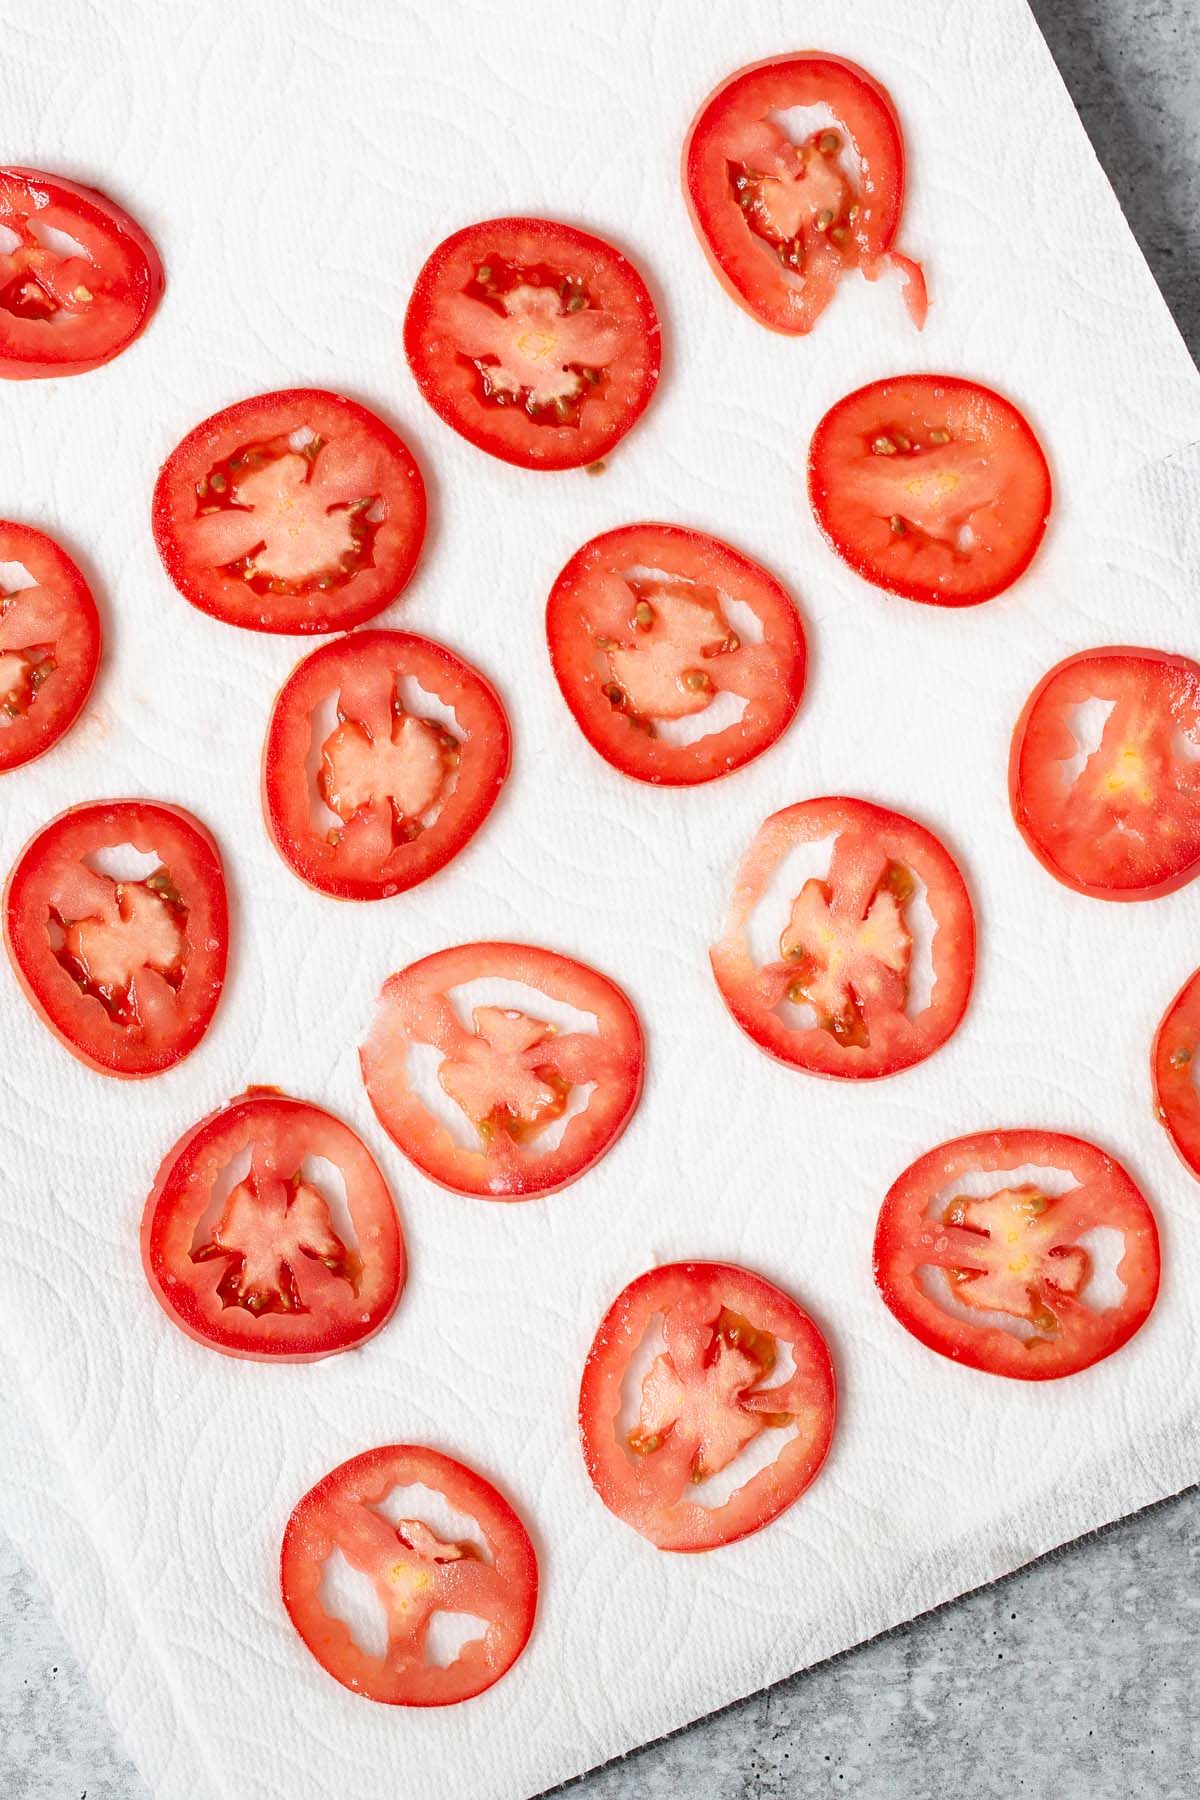 tomato slices on a paper towel